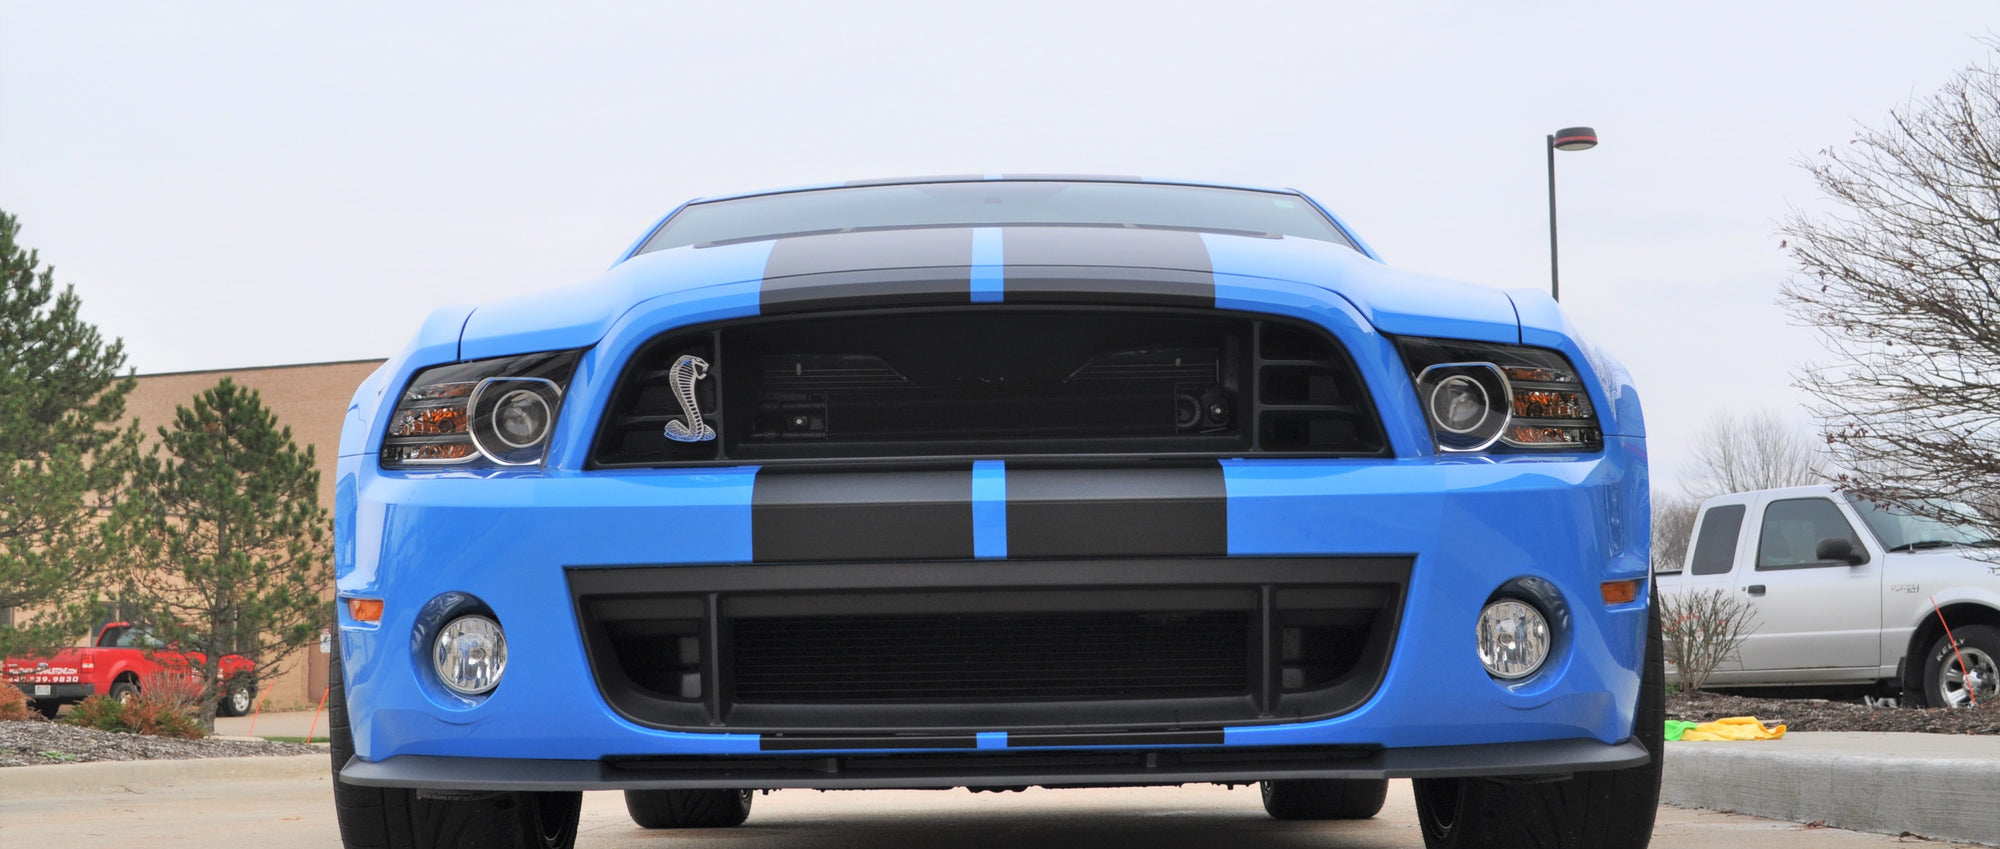 2011 Ford Mustang Shelby GT500 5.4L V8